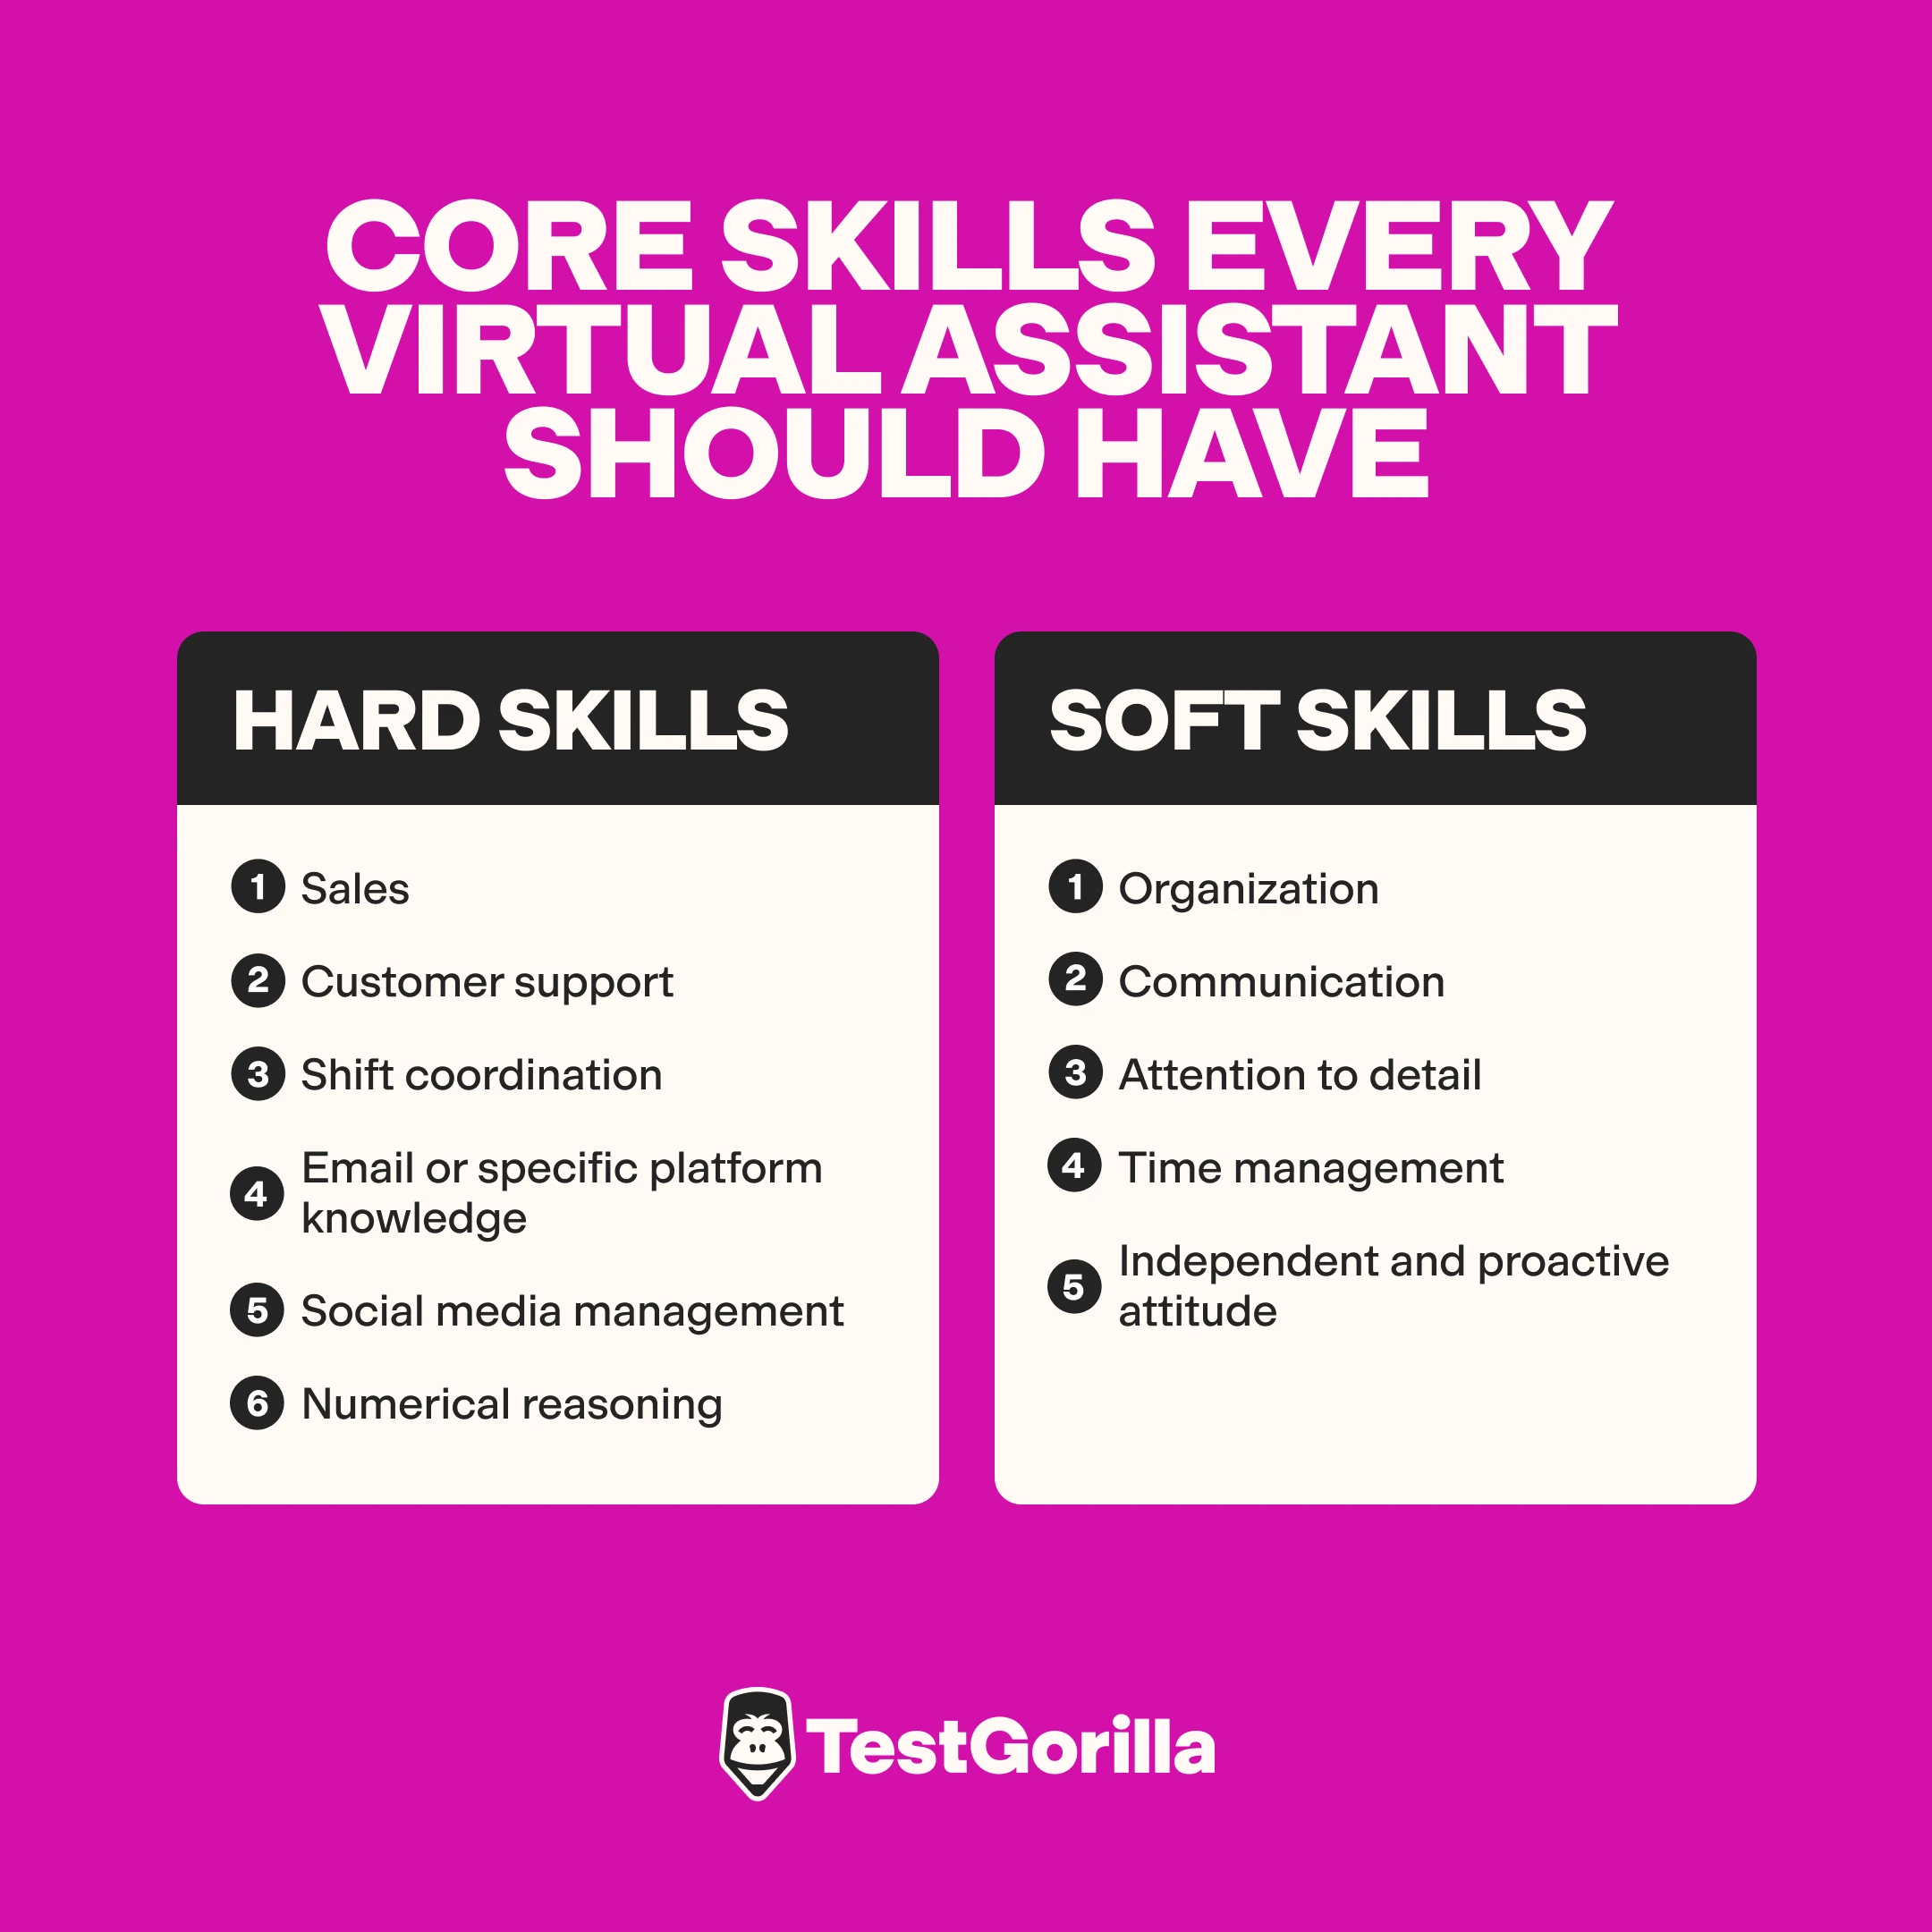 Core-skills-every-virtual-assistant-should-have.